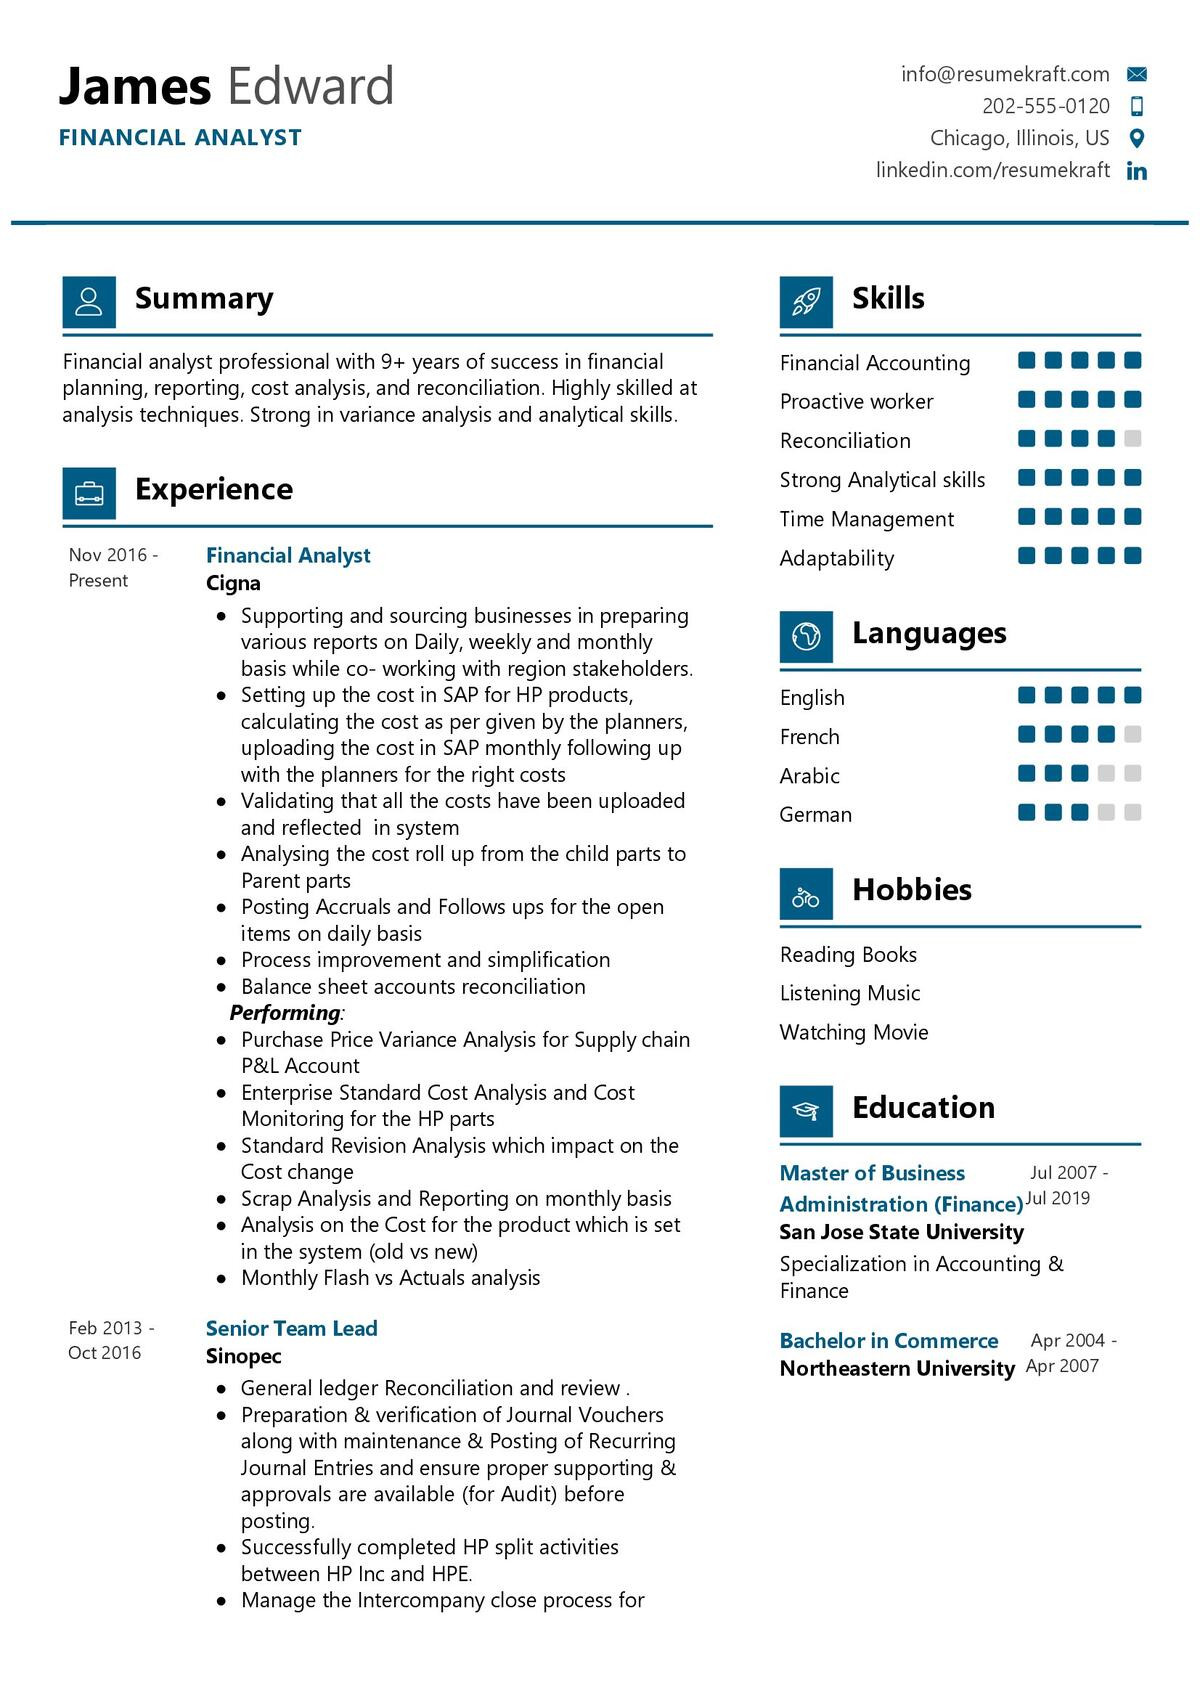 Sample Resume for Corporate Finance Analyst Financial Analyst Resume Sample 2021 Writing Guide & Tips …